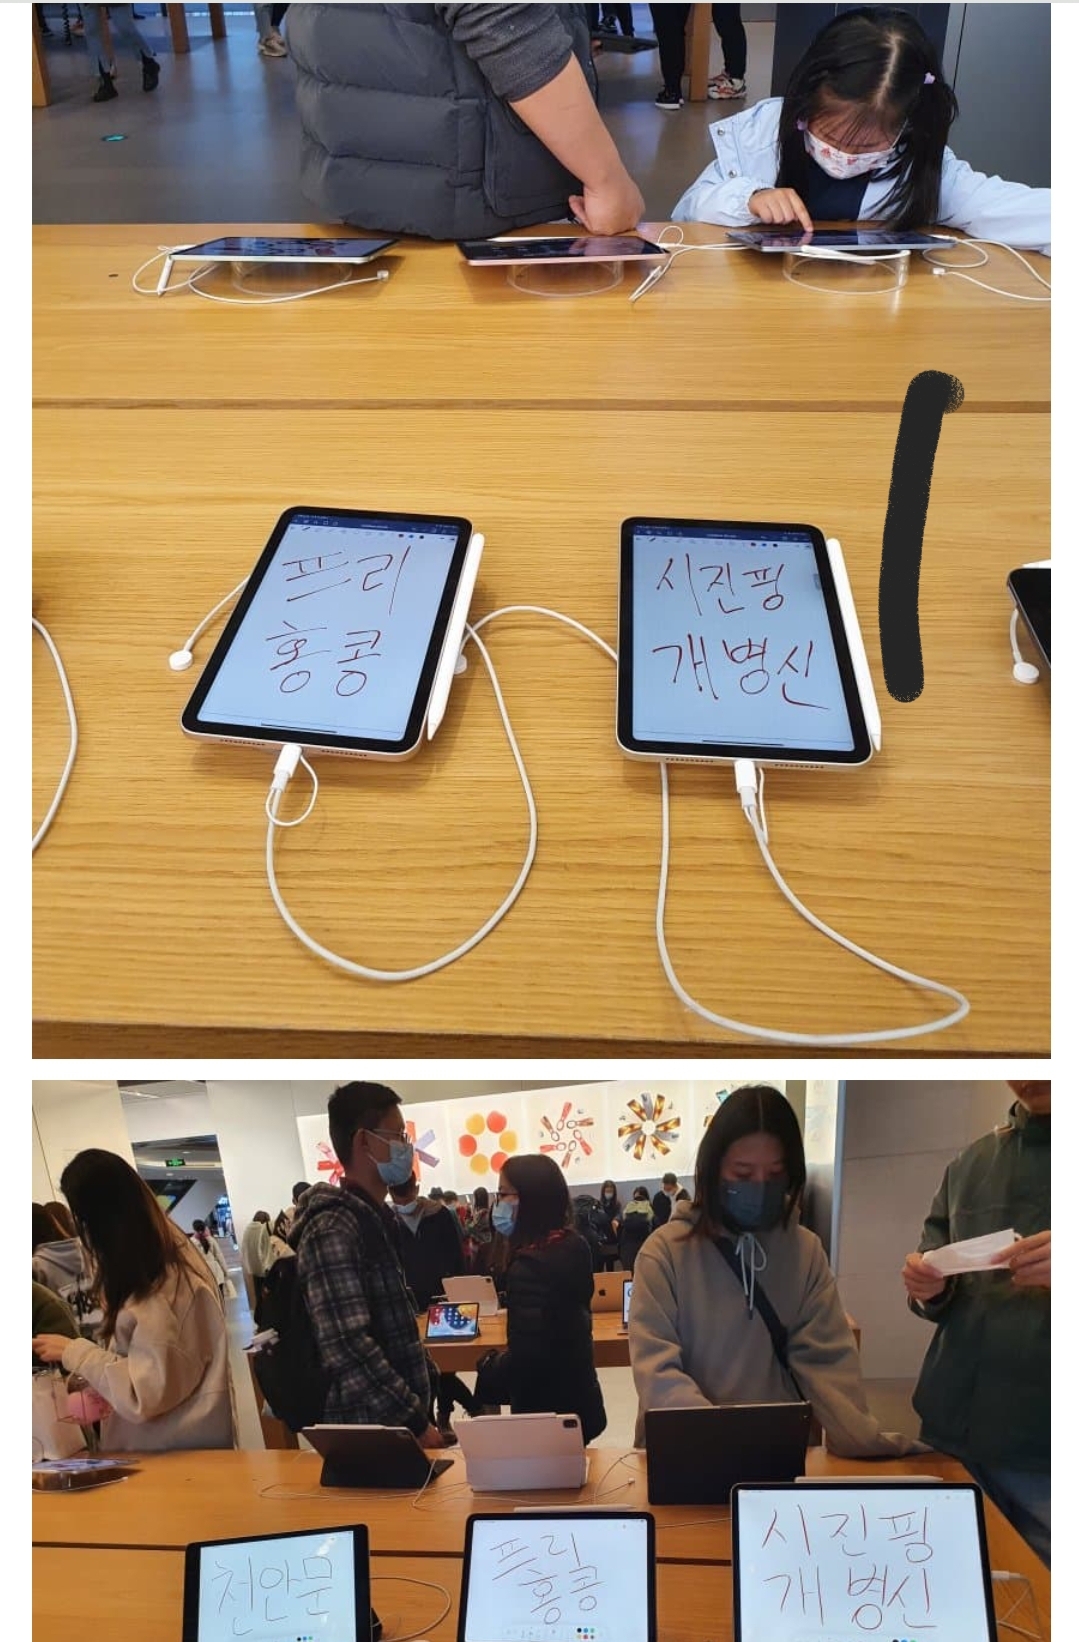 A dishie who went to an Apple store in China on a business trip.